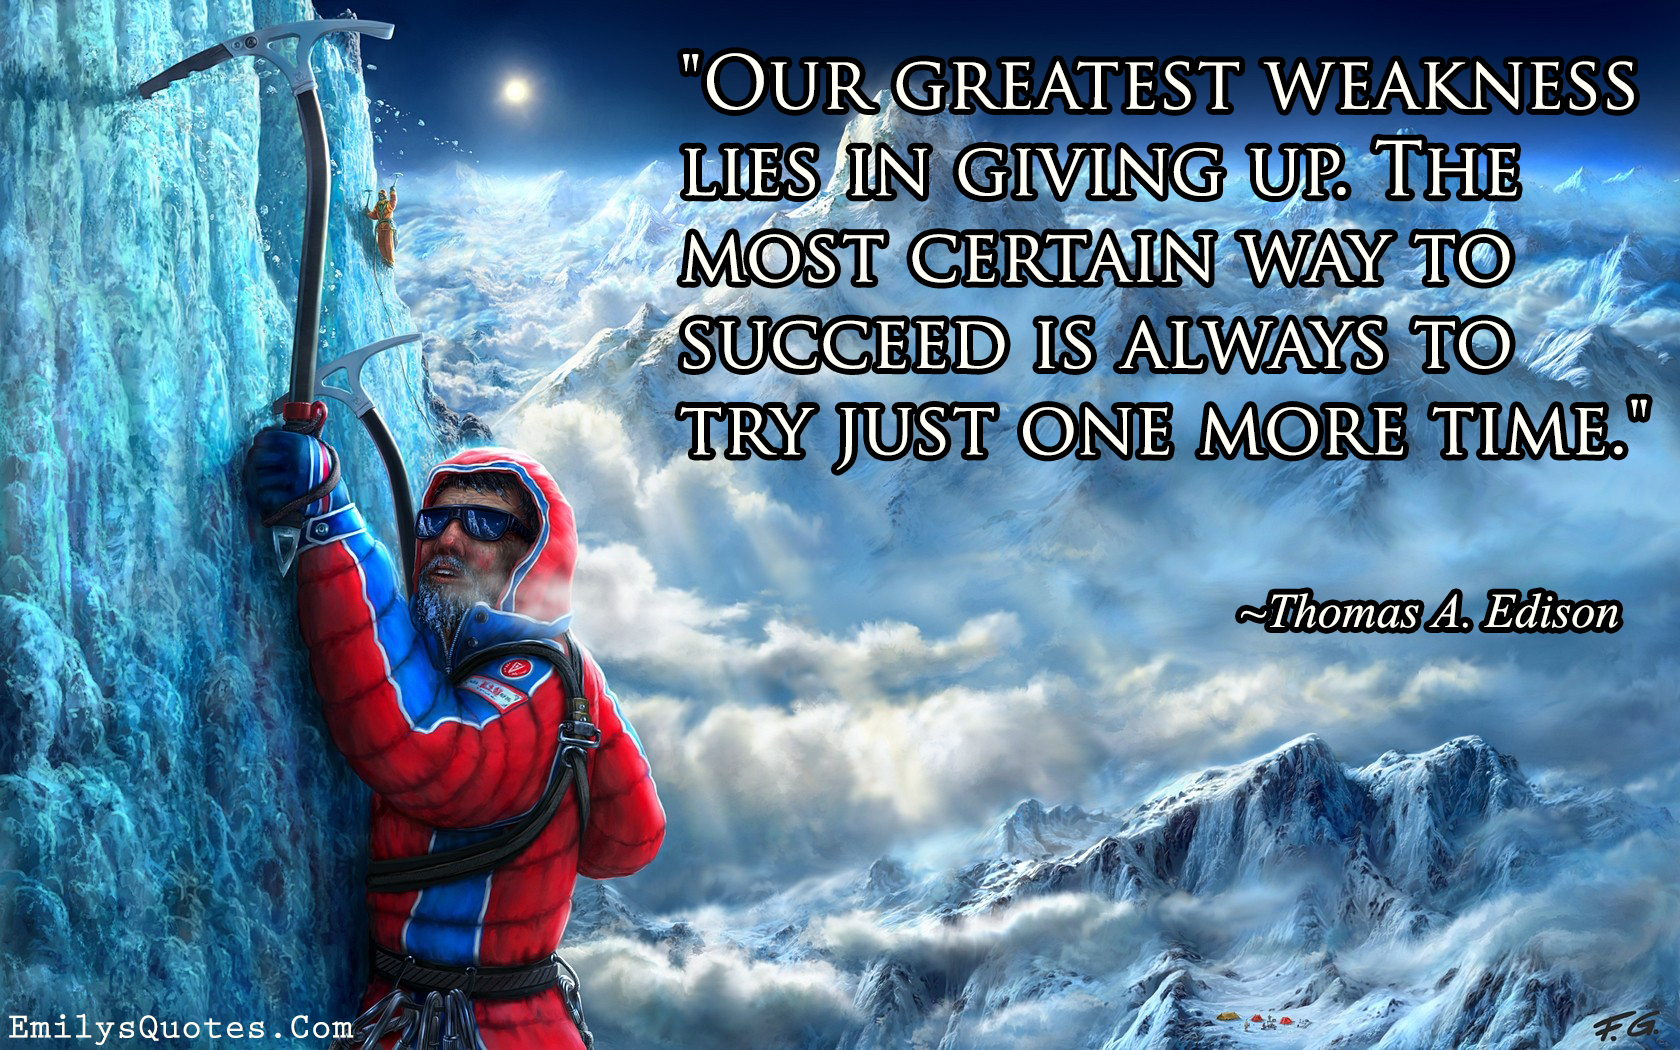 Our greatest weakness lies in giving up. The most certain